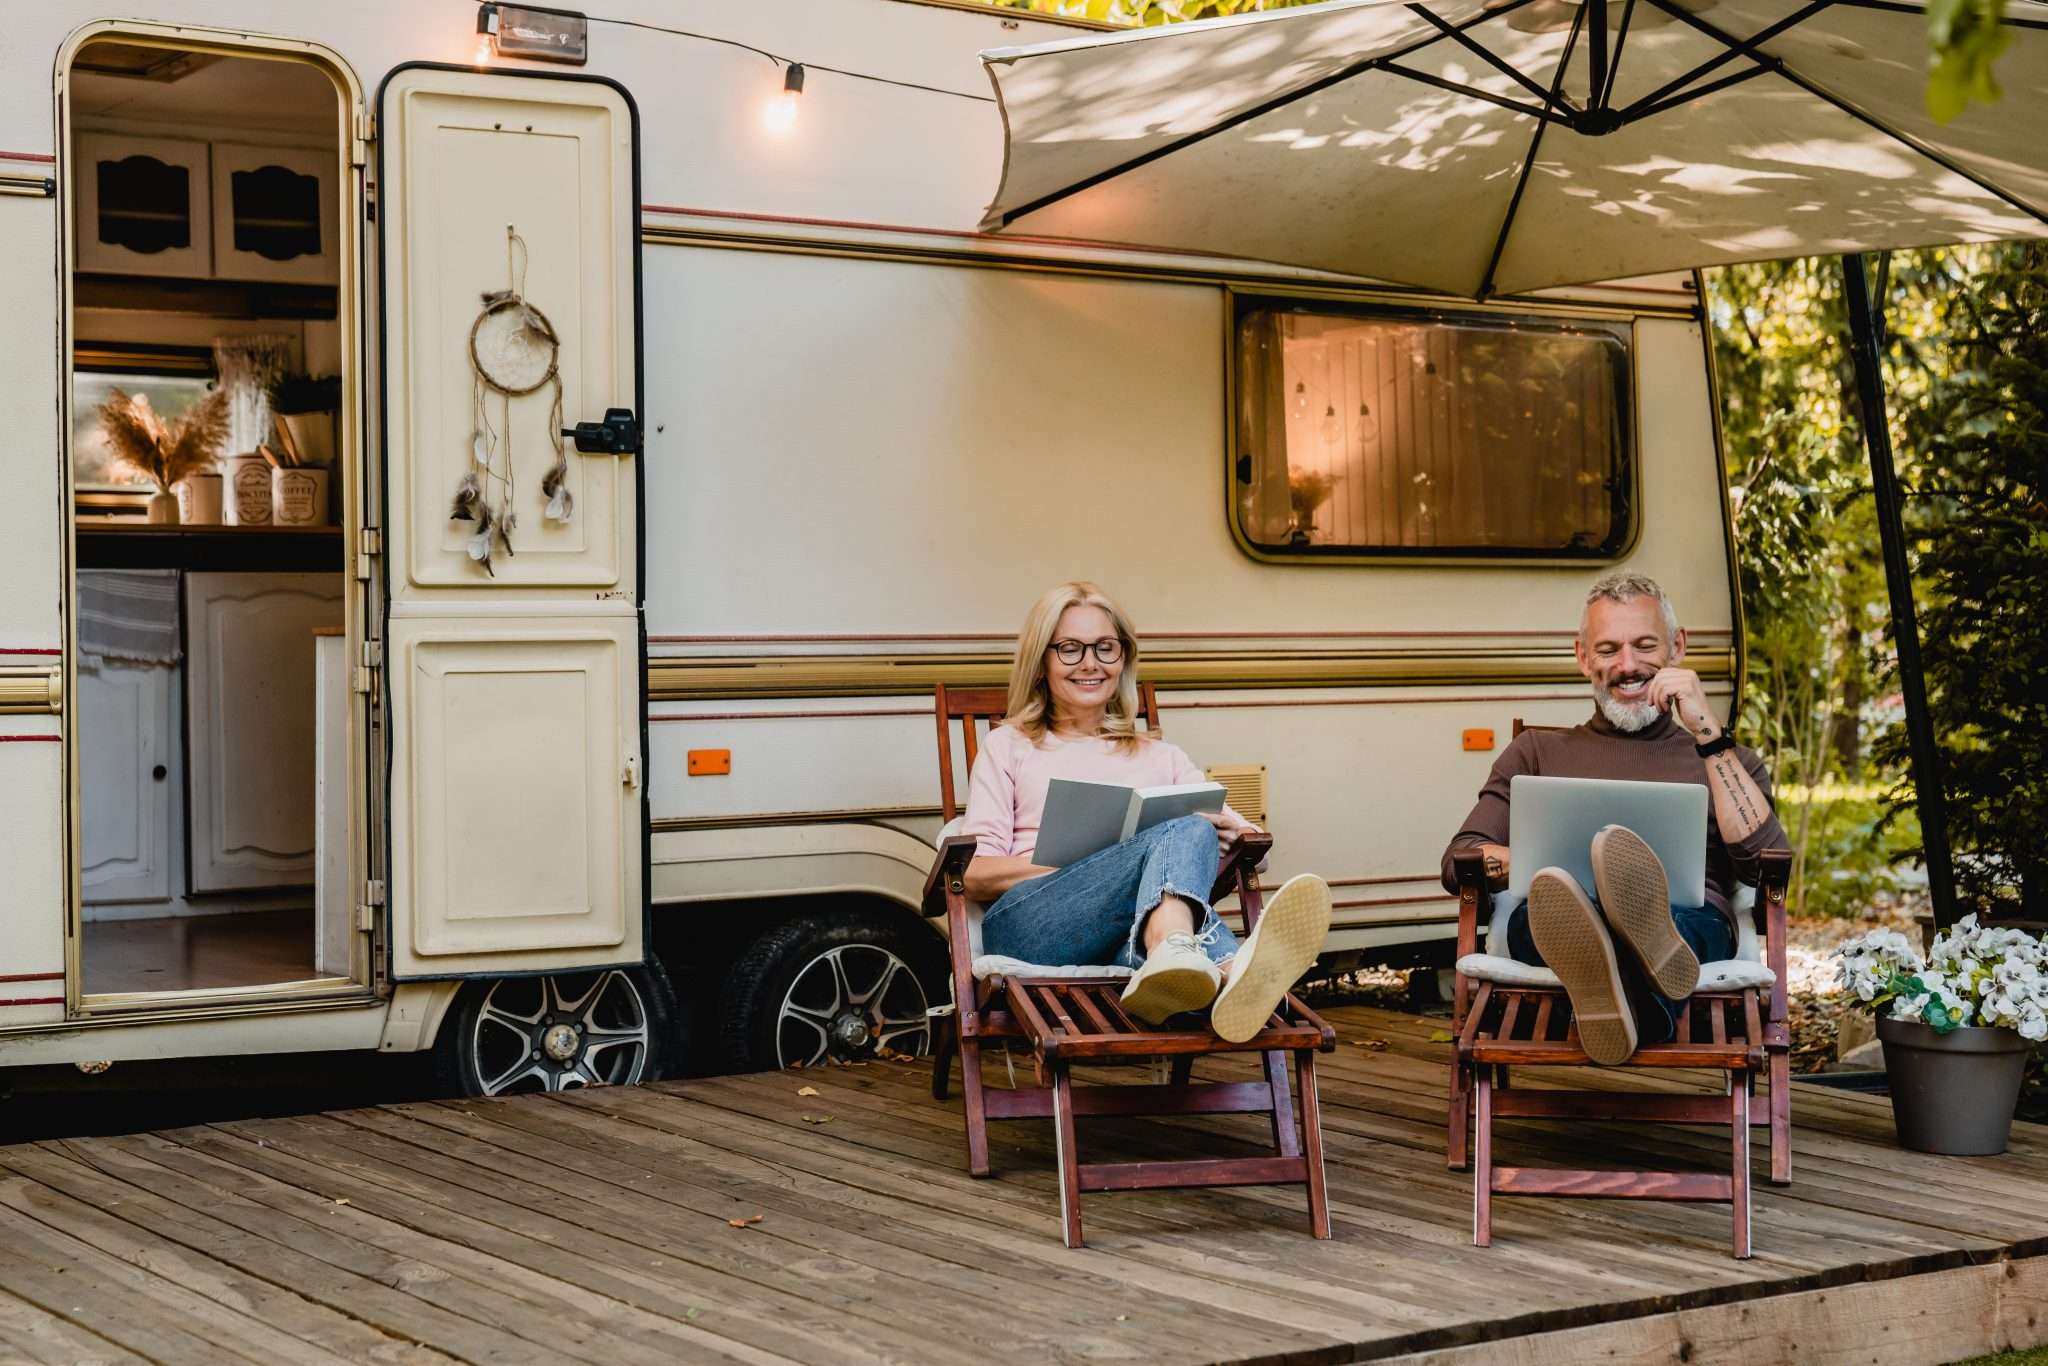 Couple relaxing on RV porch